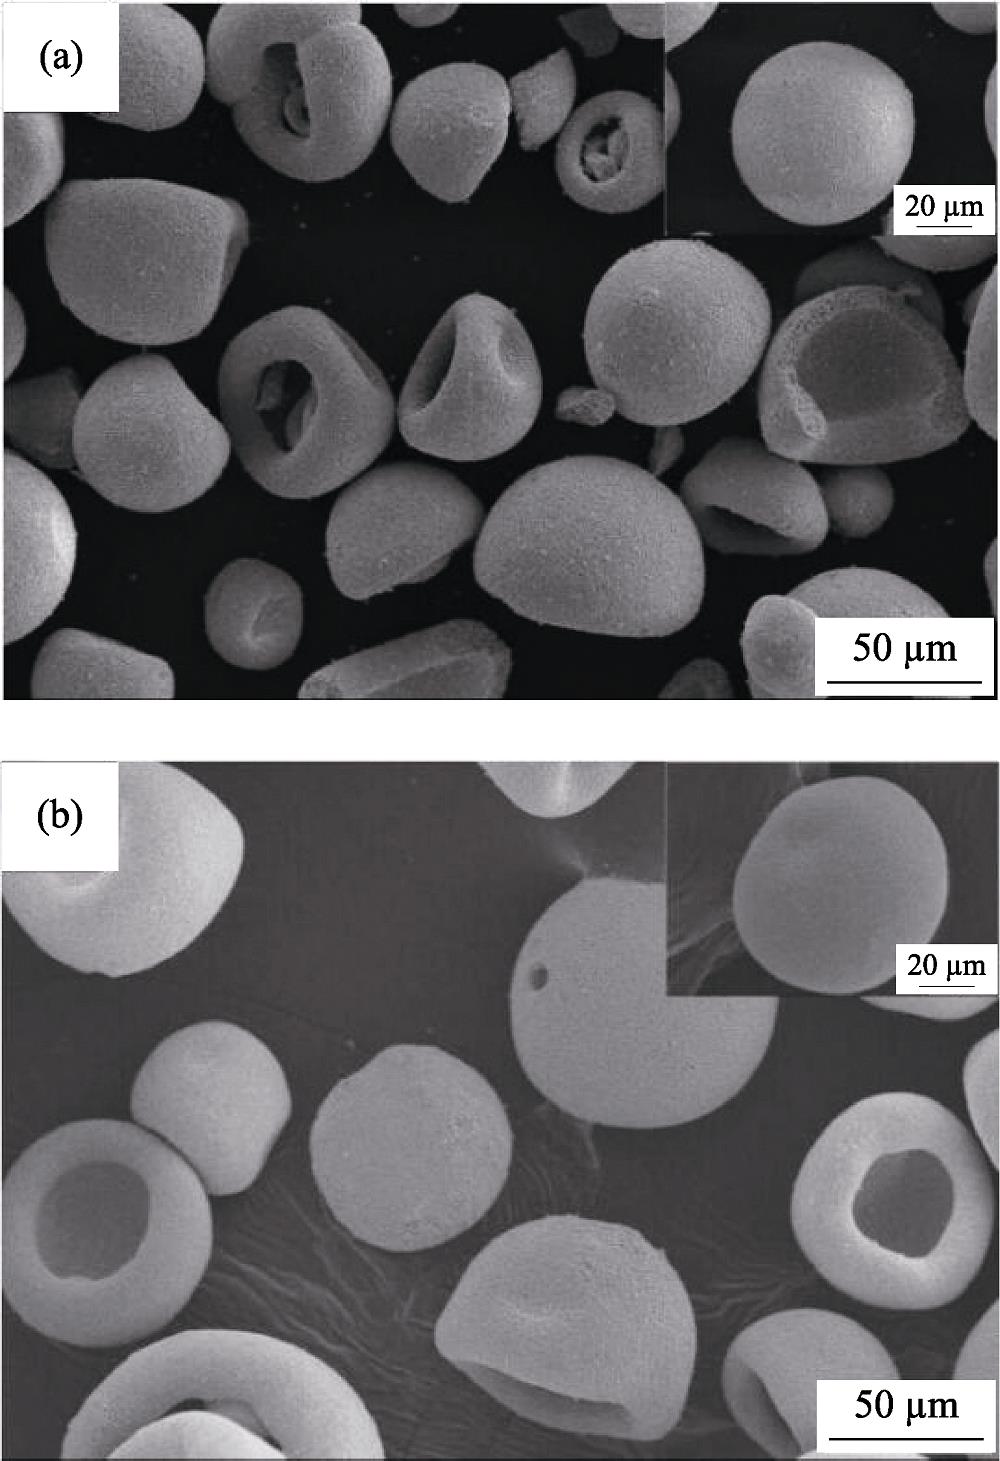 SEM images of two different powders